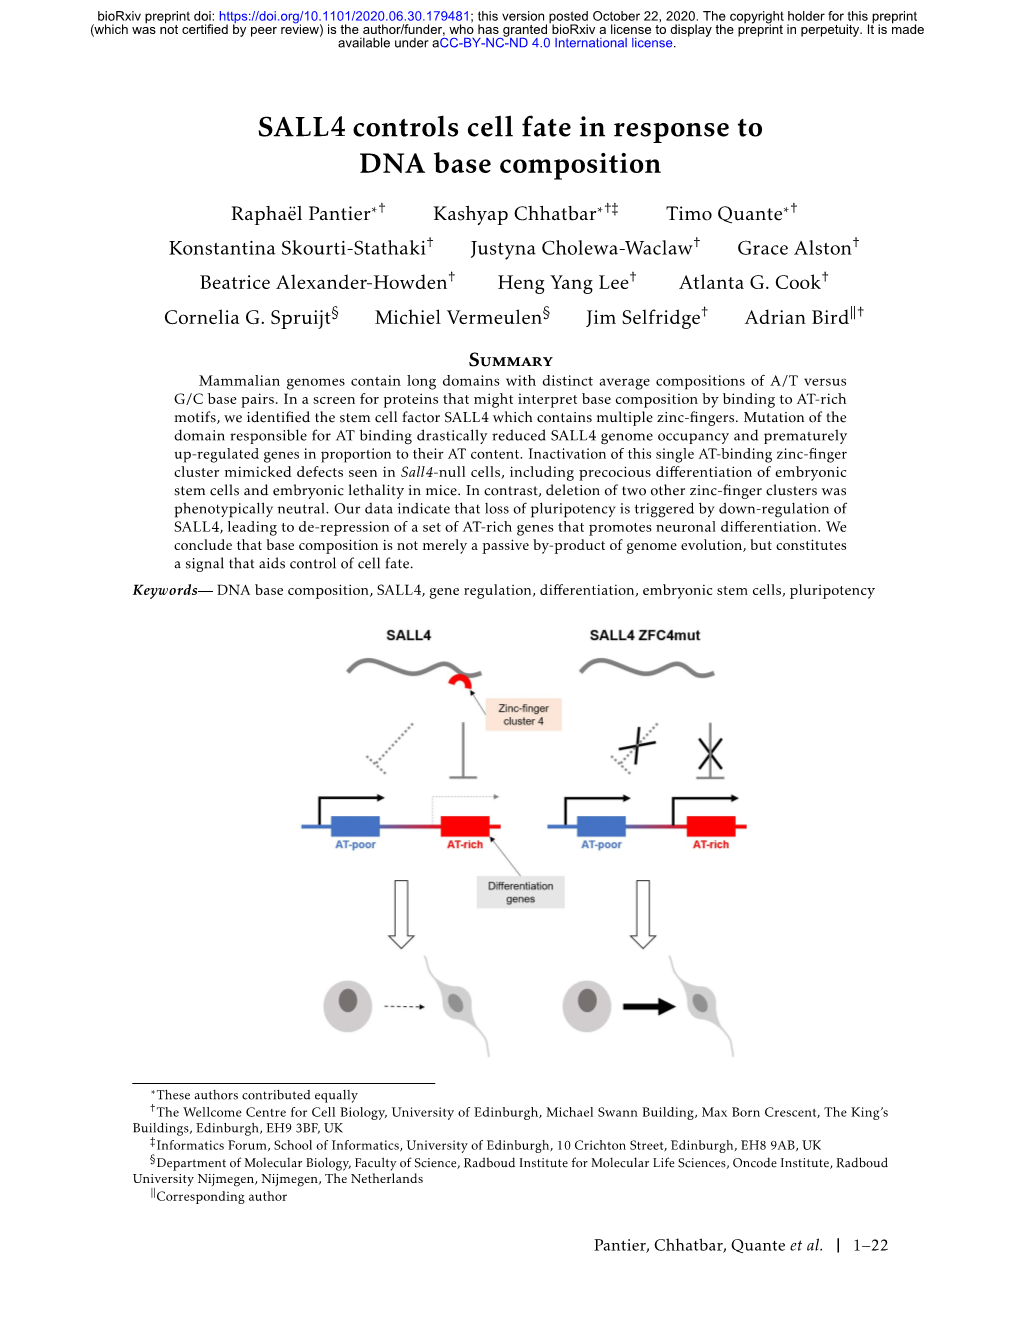 SALL4 Controls Cell Fate in Response to DNA Base Composition